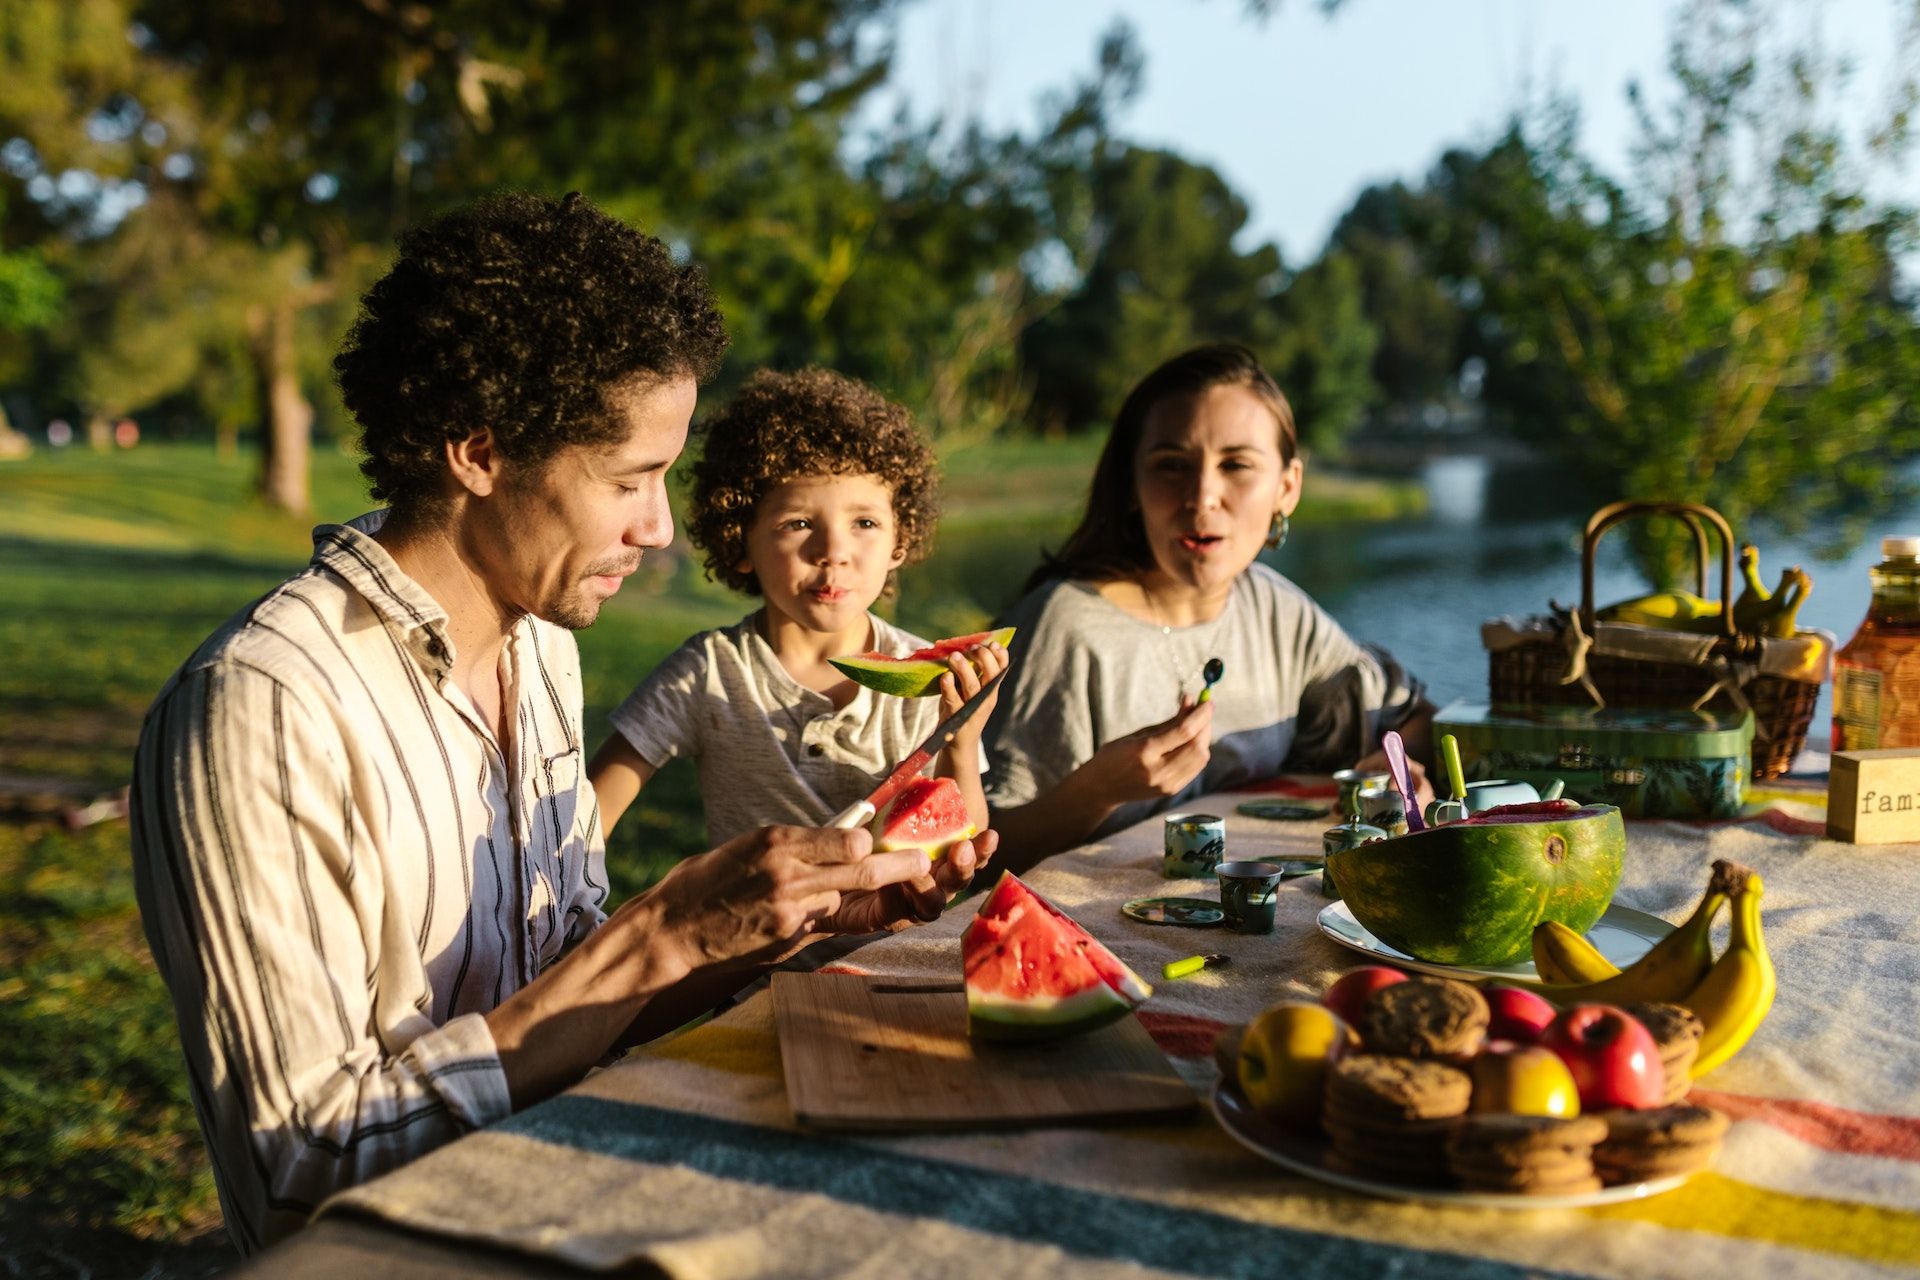 A family eating together outdoors.